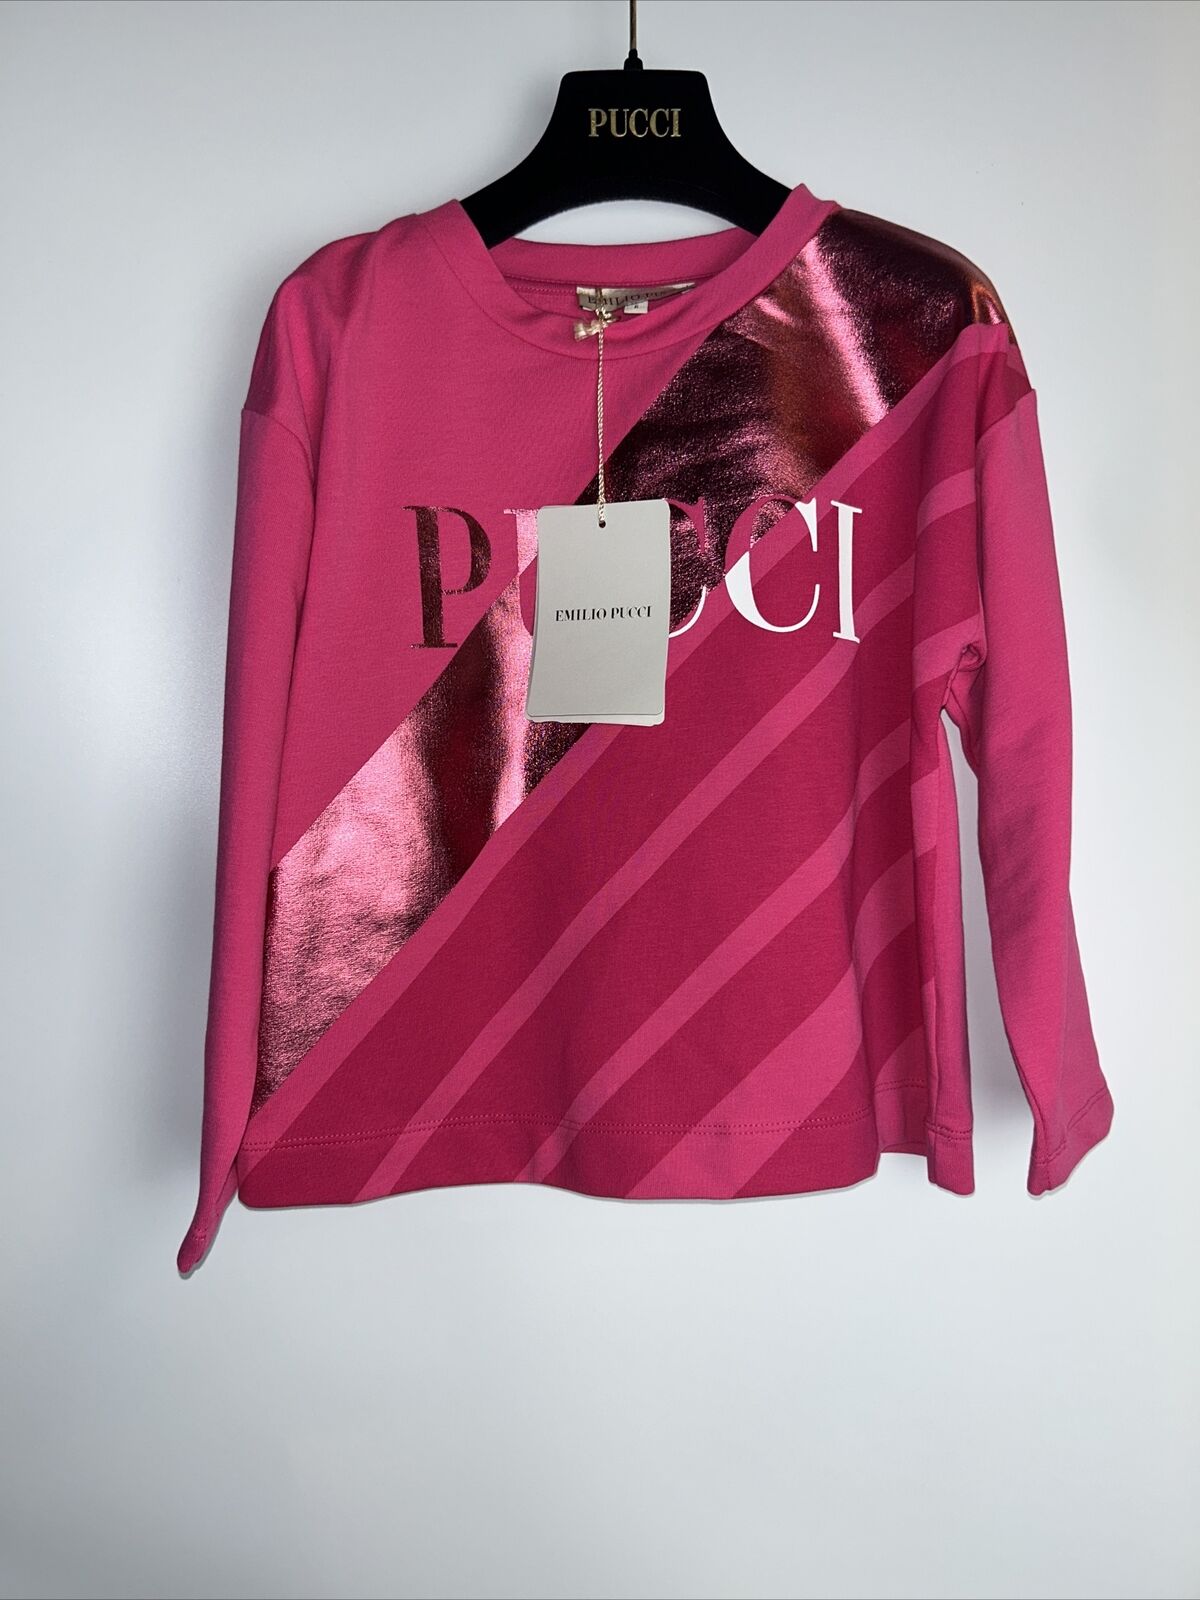 Emilo Pucci Jumper for Girls - Pink. UK 5 Years **** Ref  VH6